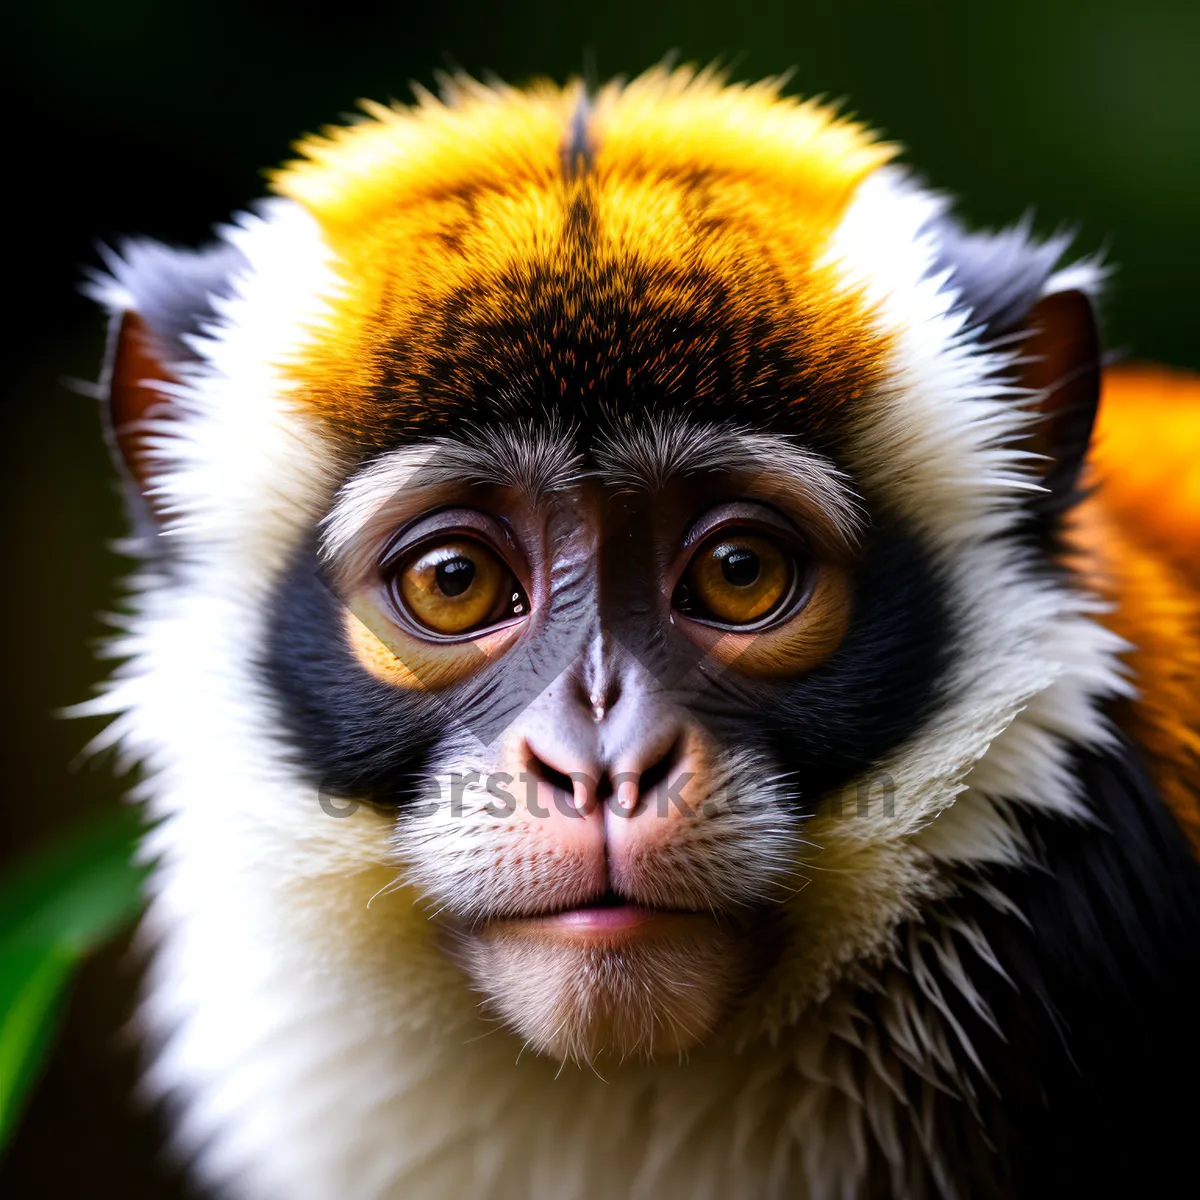 Picture of Wild Macaque Monkey with Piercing Eyes in Safari